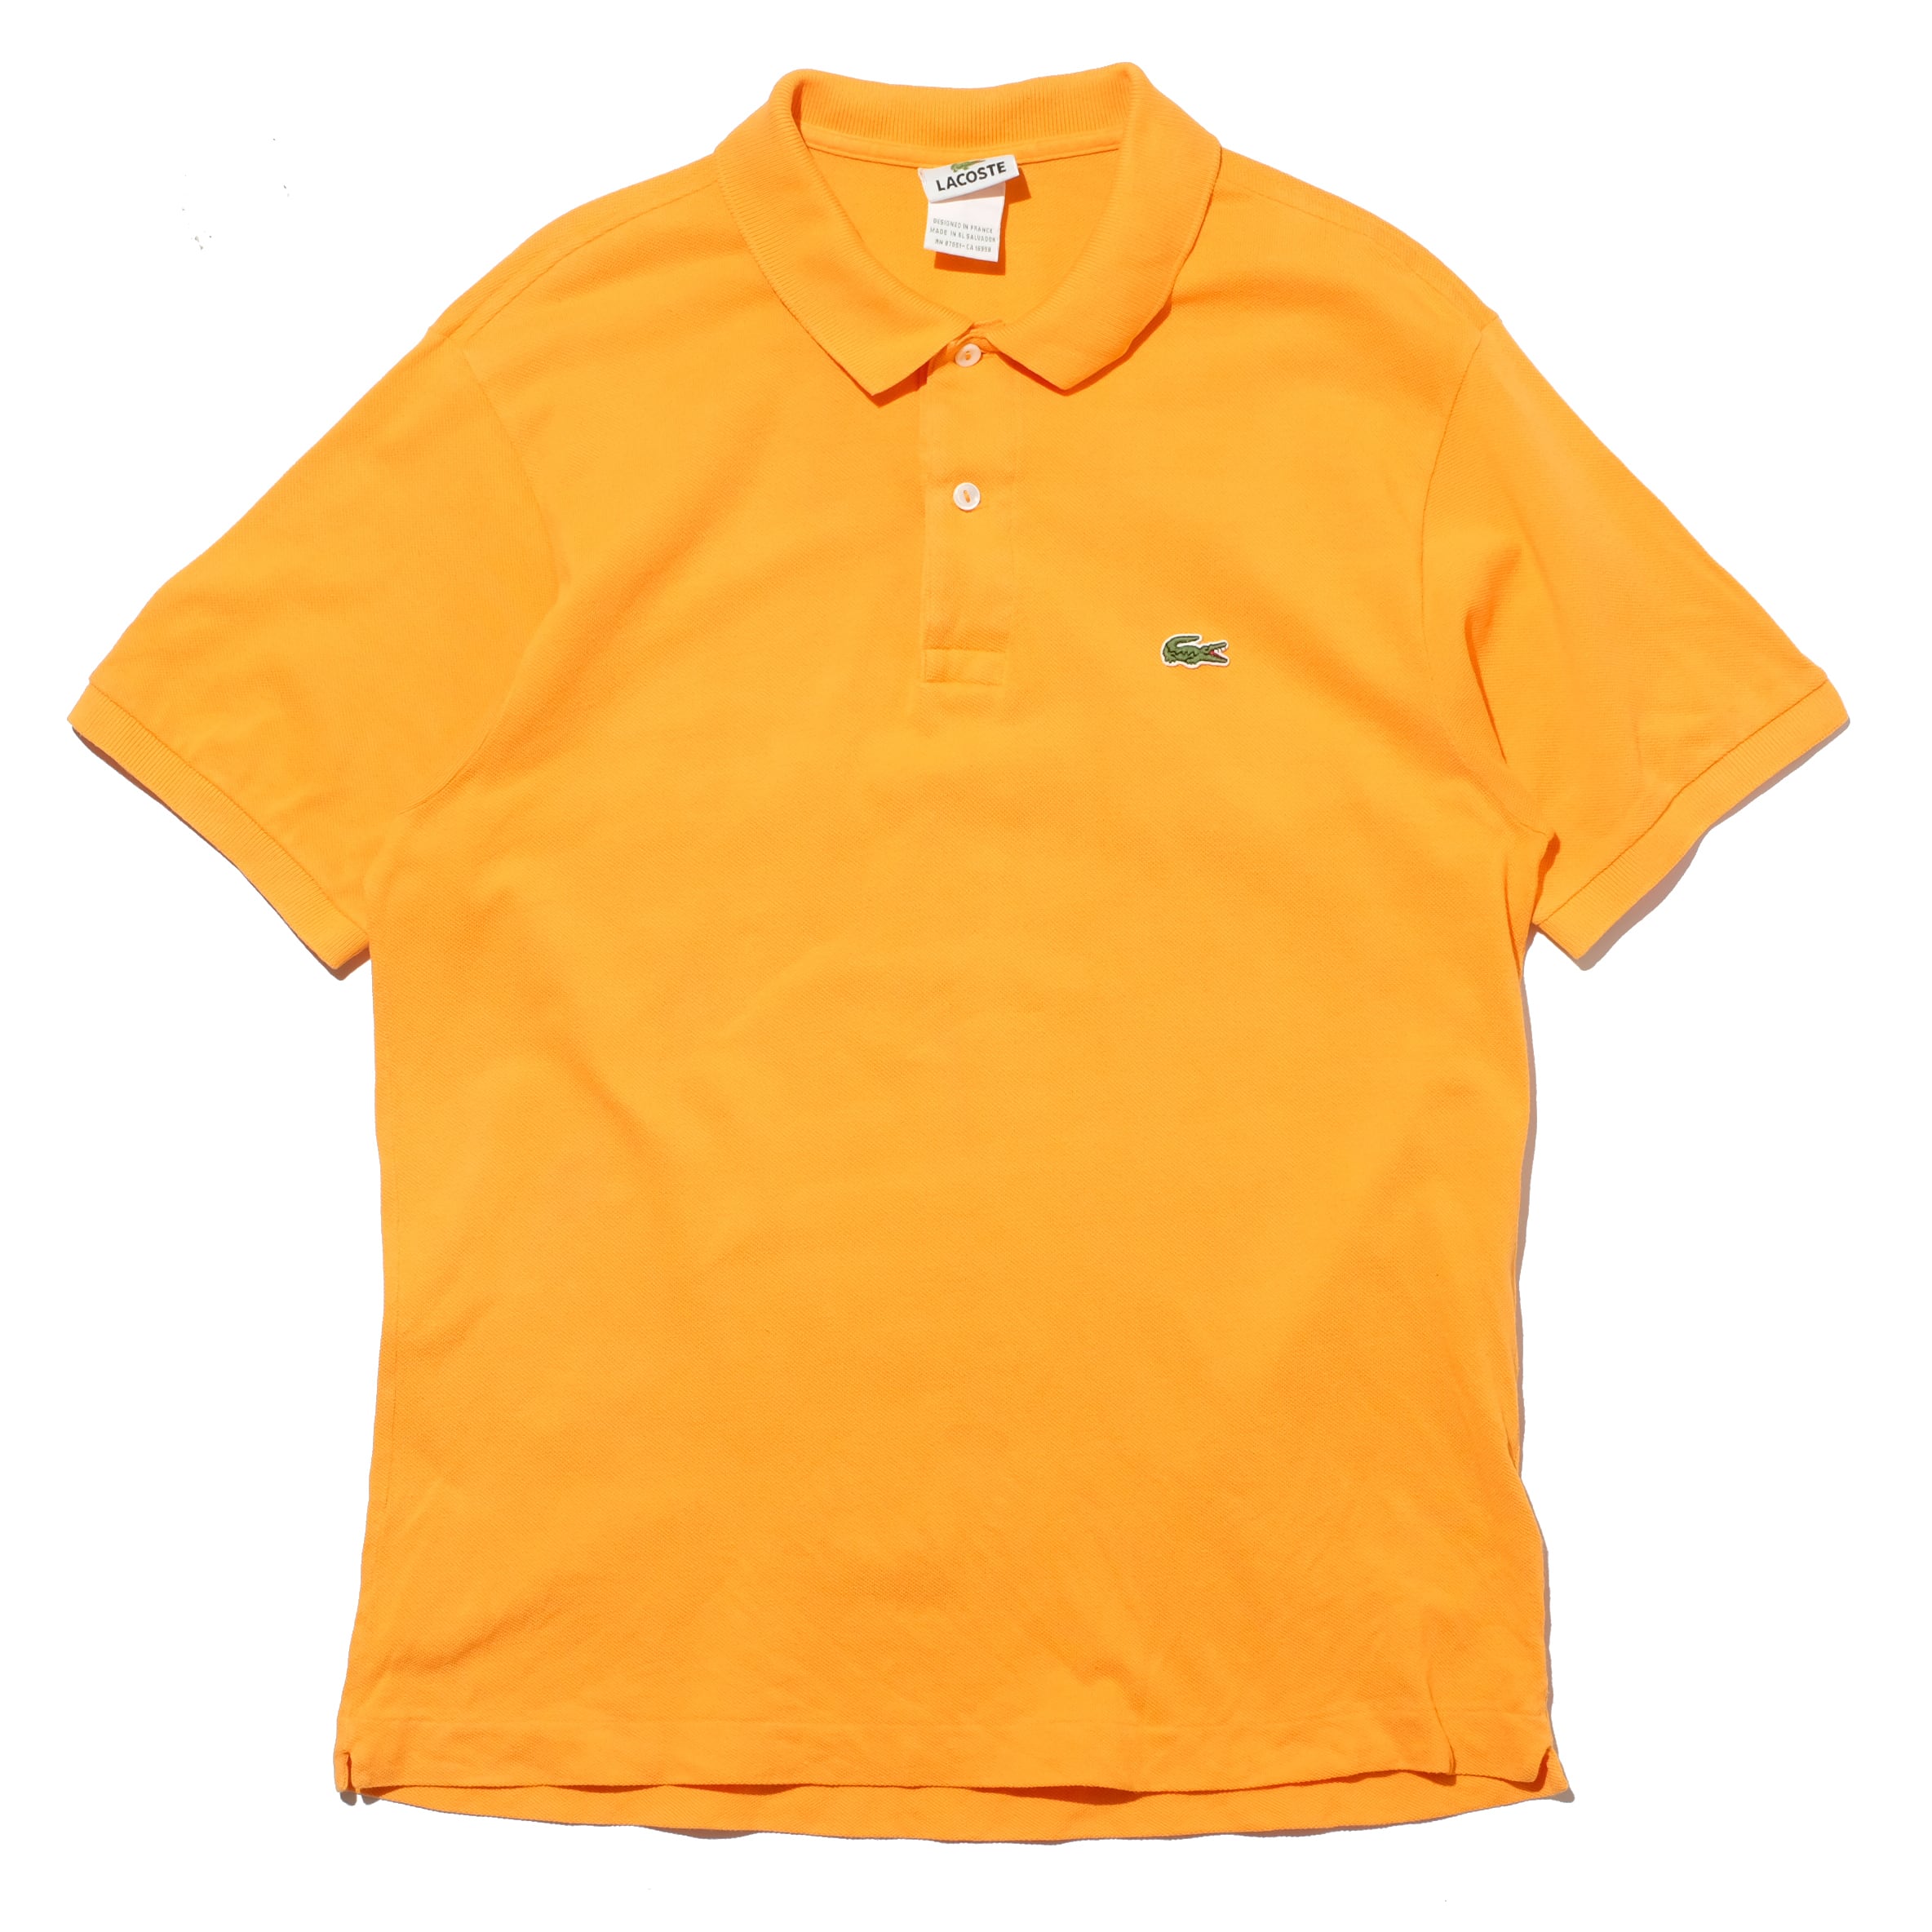 Lacoste by DEVANLAY S/S polo-shirt size 5 | goodbuy